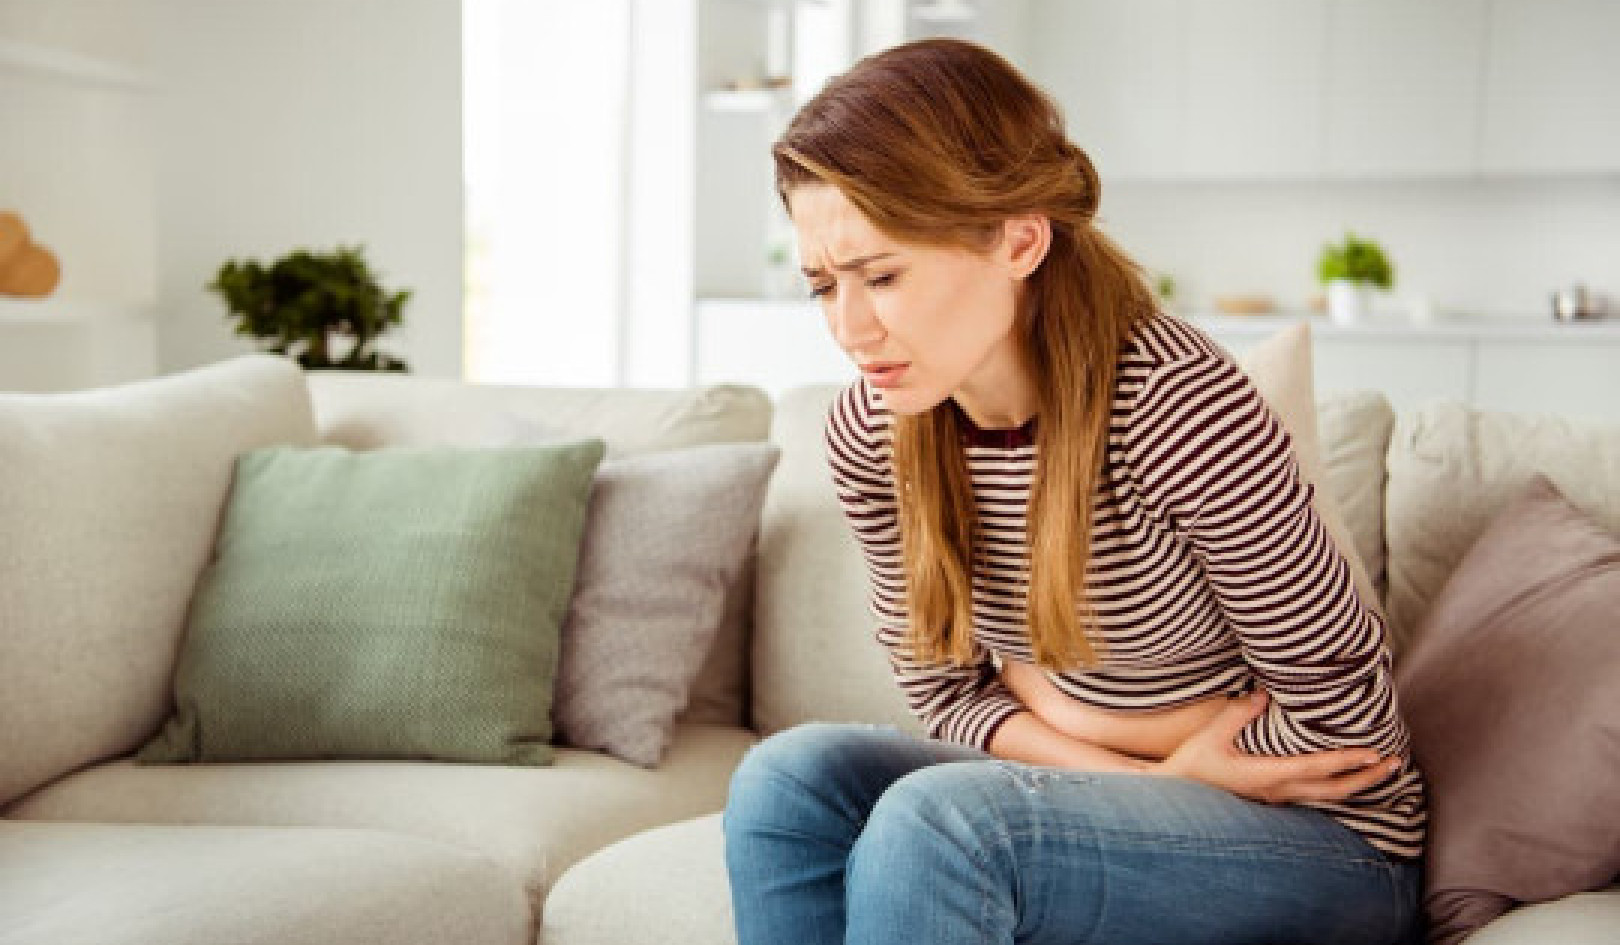 People with IBS Face Greater Anxiety and Depression